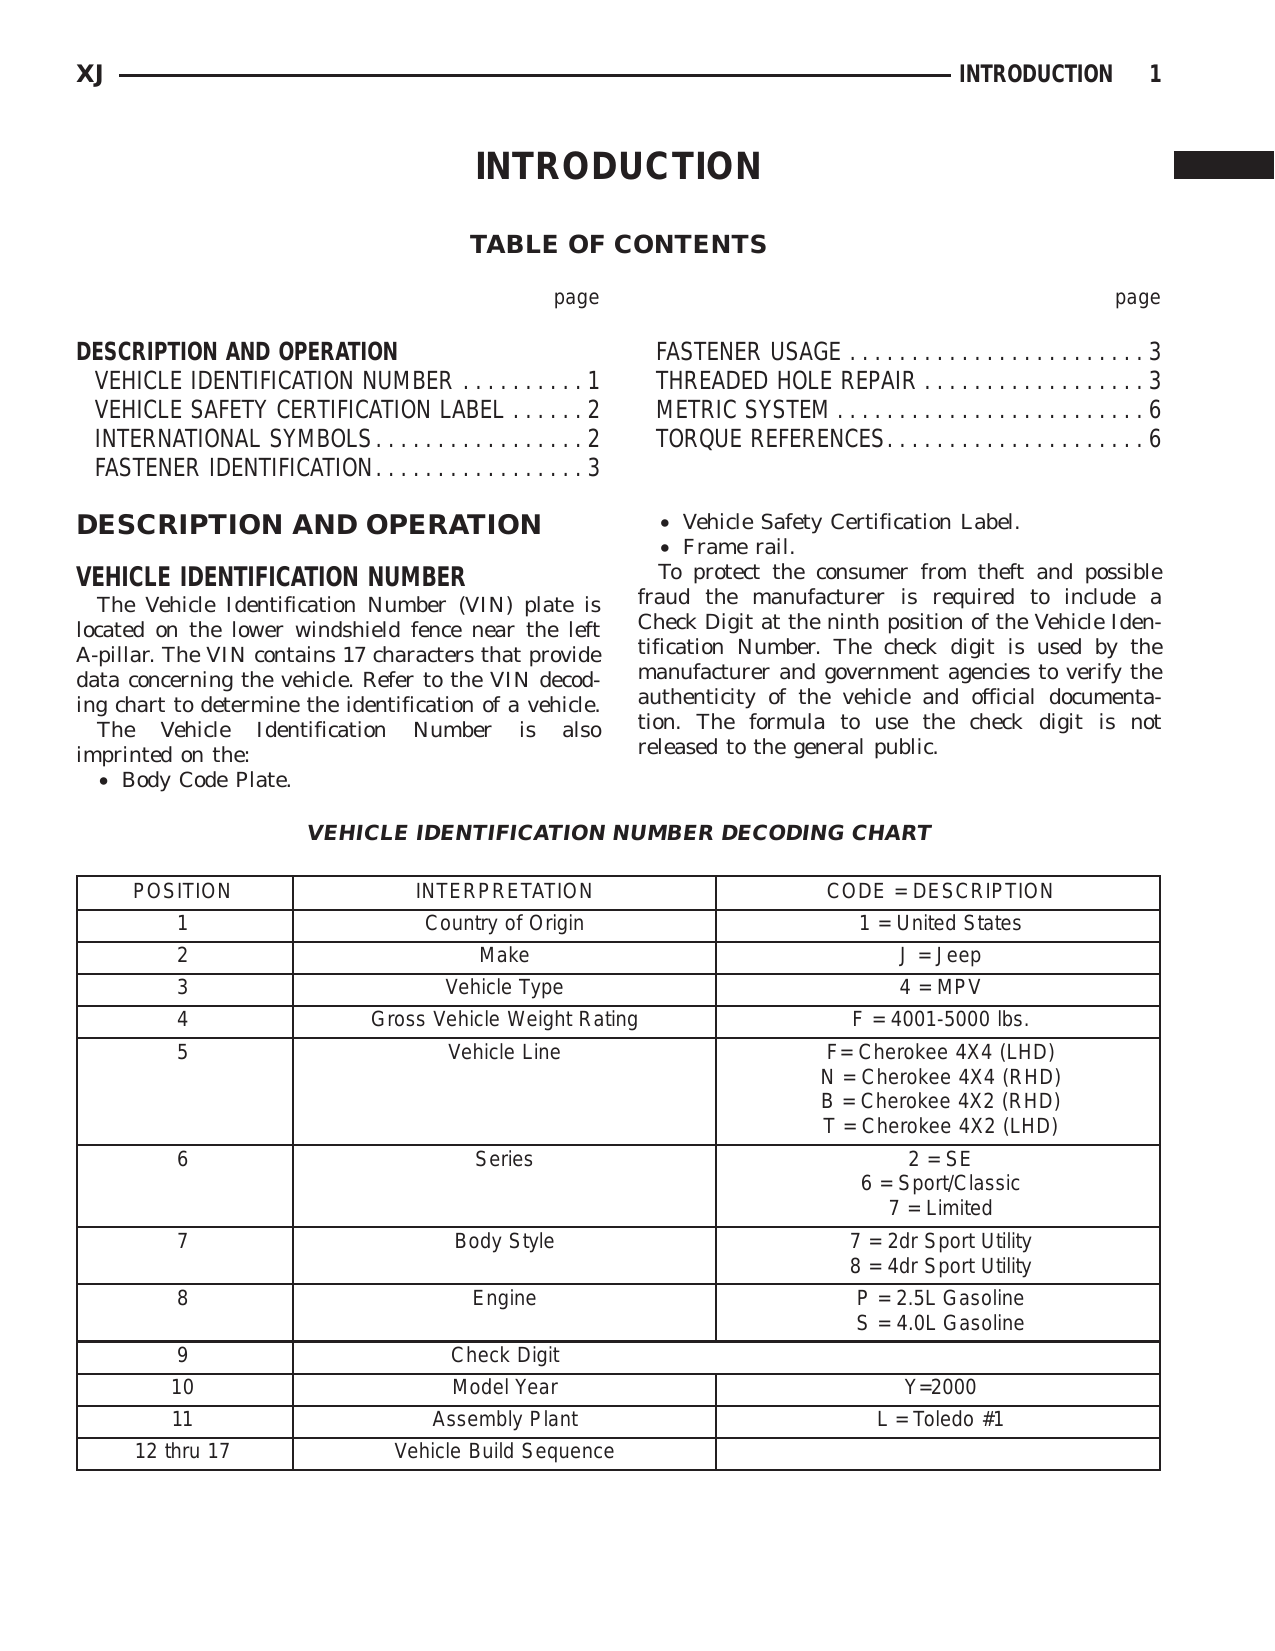 2000 Jeep Cherokee service manual Preview image 3